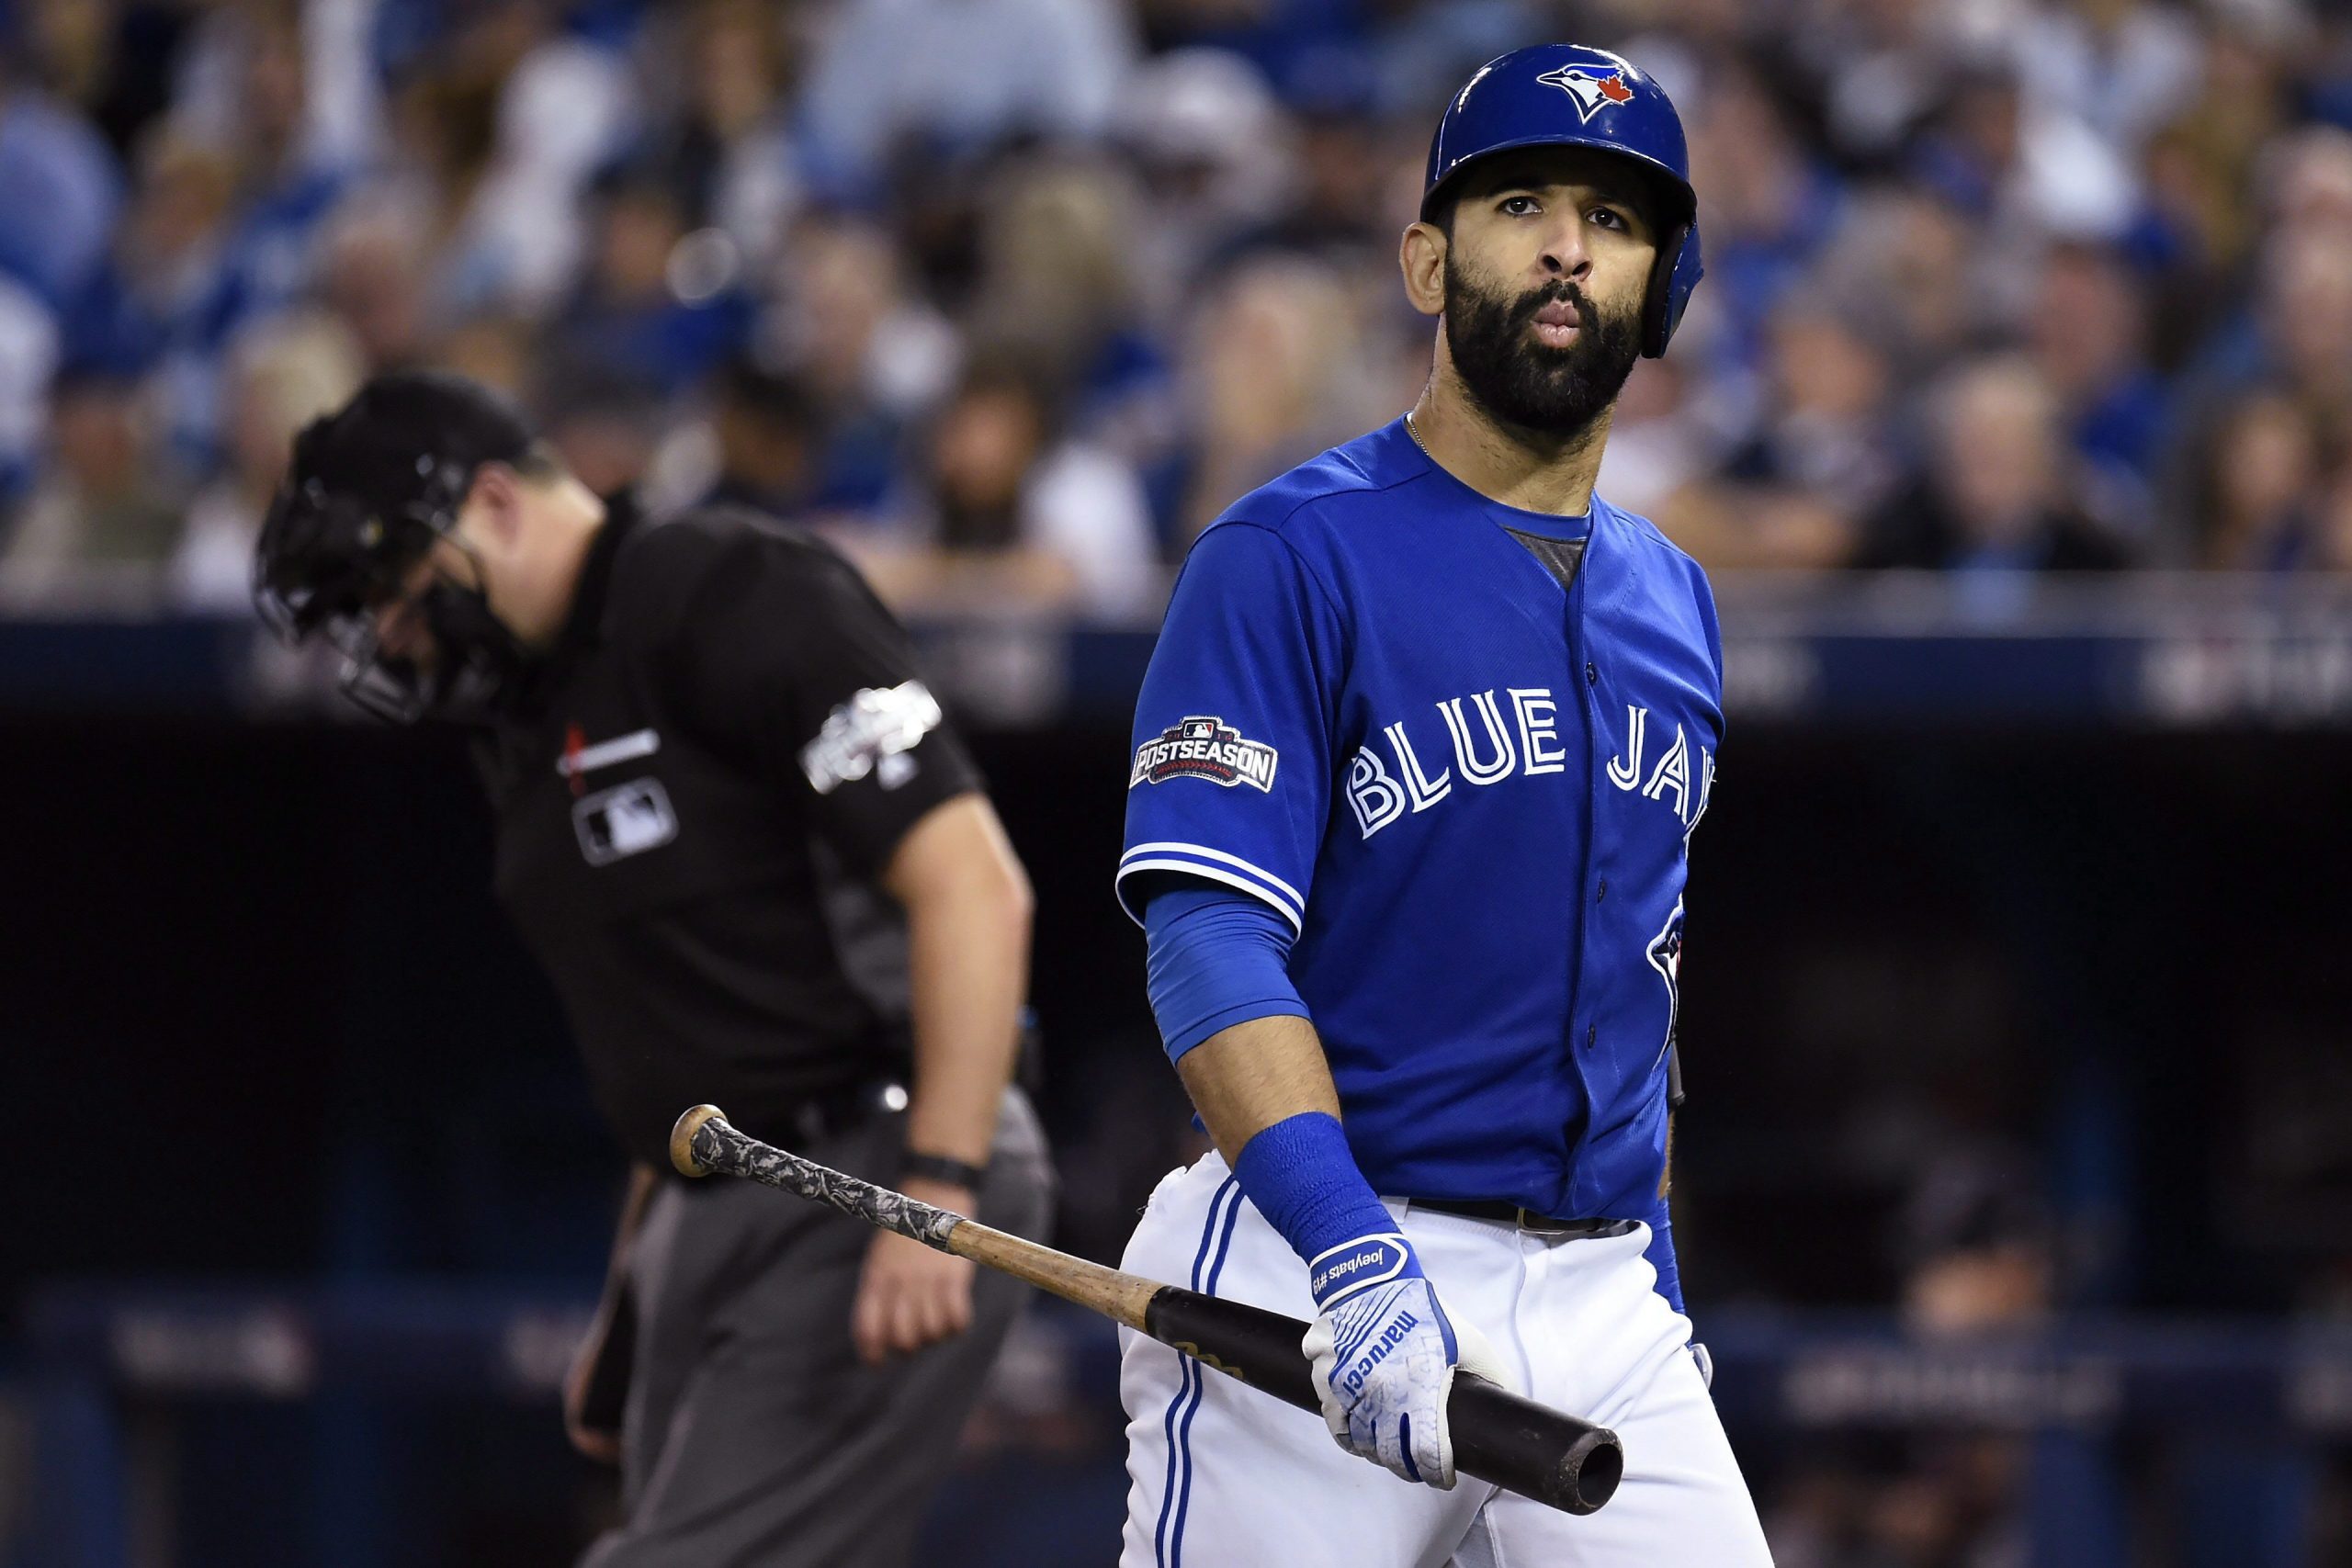 Report: Bautista to turn down qualifying offer from Blue Jays